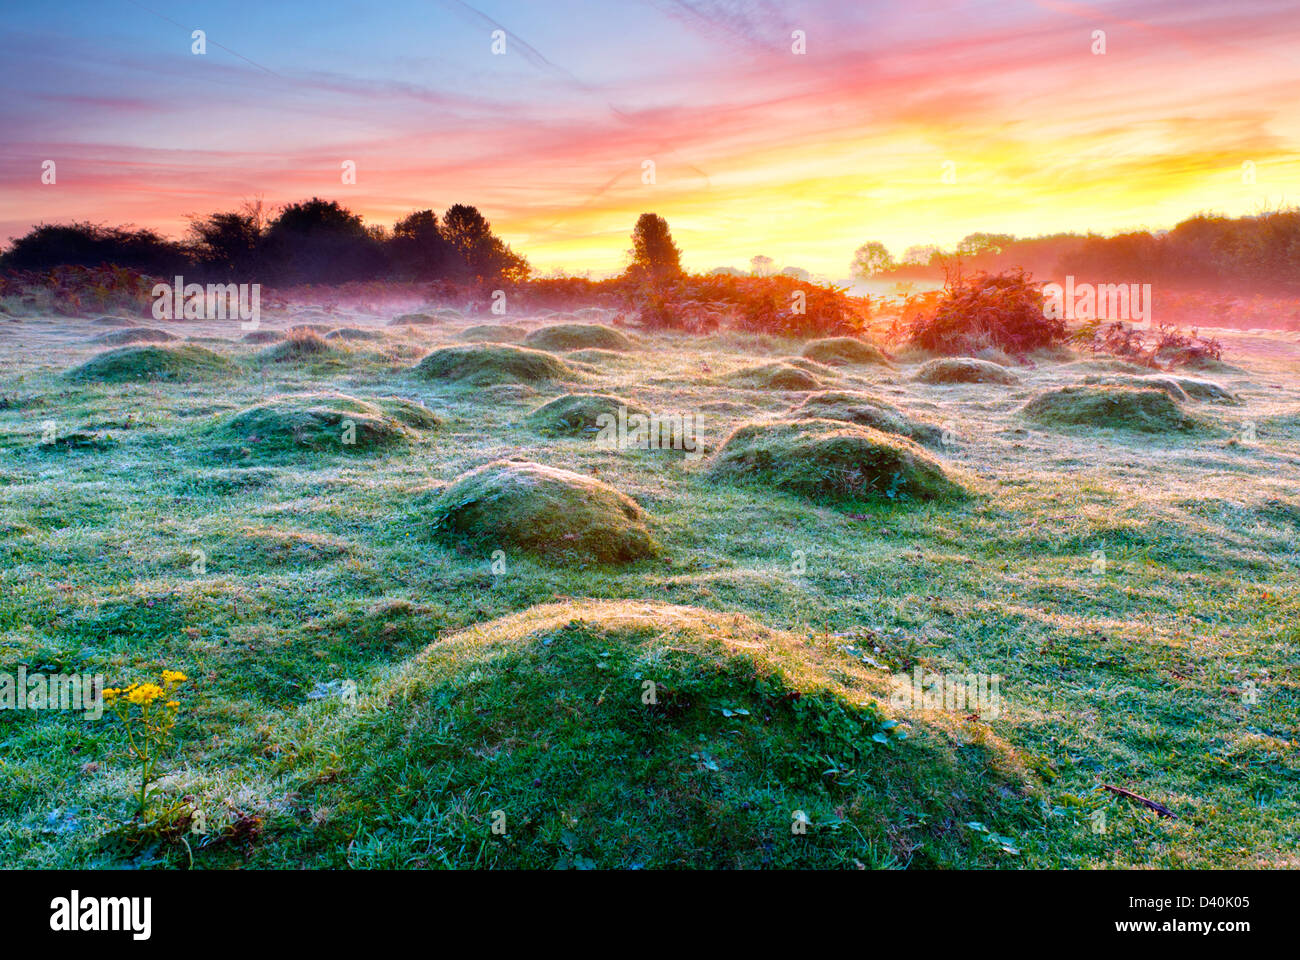 Sunrise on top of the Mendip hills with frosted grassy nodules in the foreground and thin mist and small trees in the distance. Stock Photo